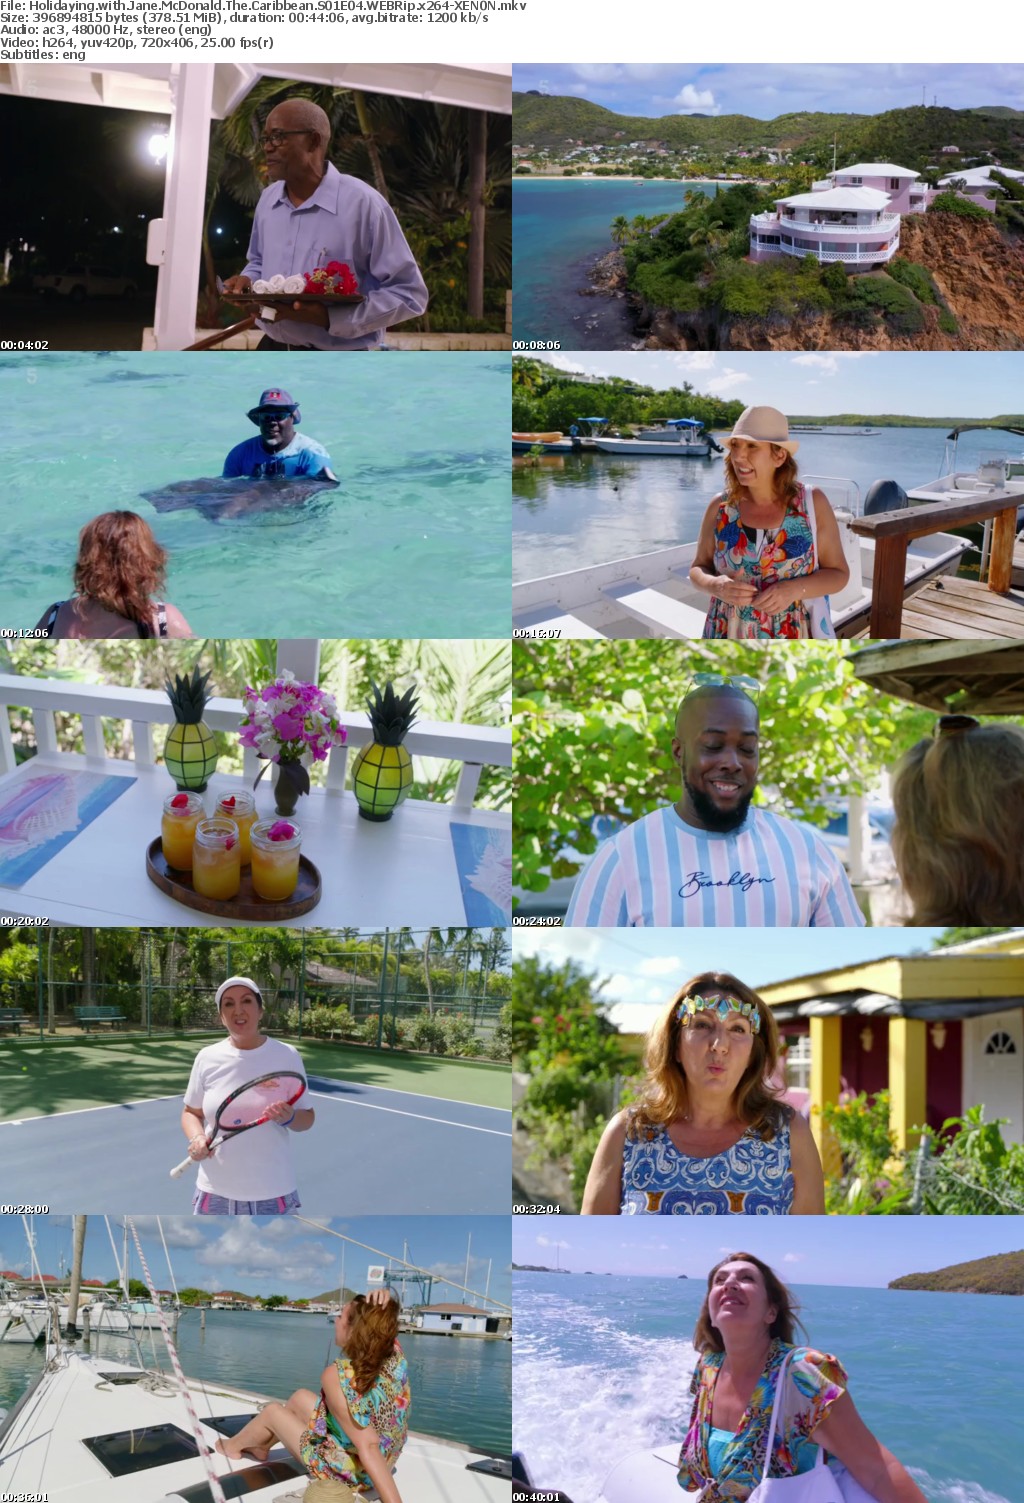 Holidaying with Jane McDonald The Caribbean S01E04 WEBRip x264-XEN0N